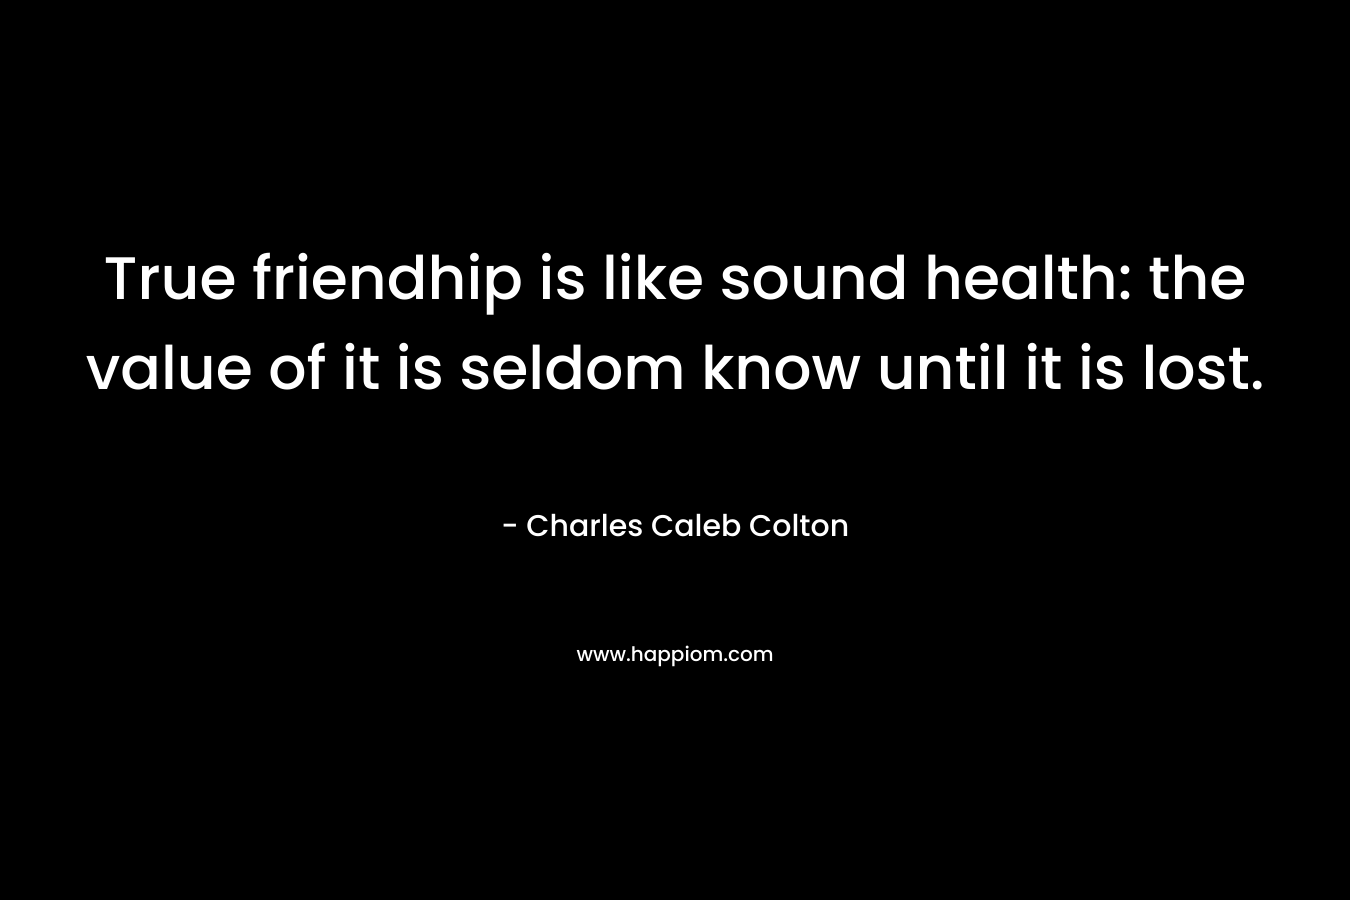 True friendhip is like sound health: the value of it is seldom know until it is lost. – Charles Caleb Colton